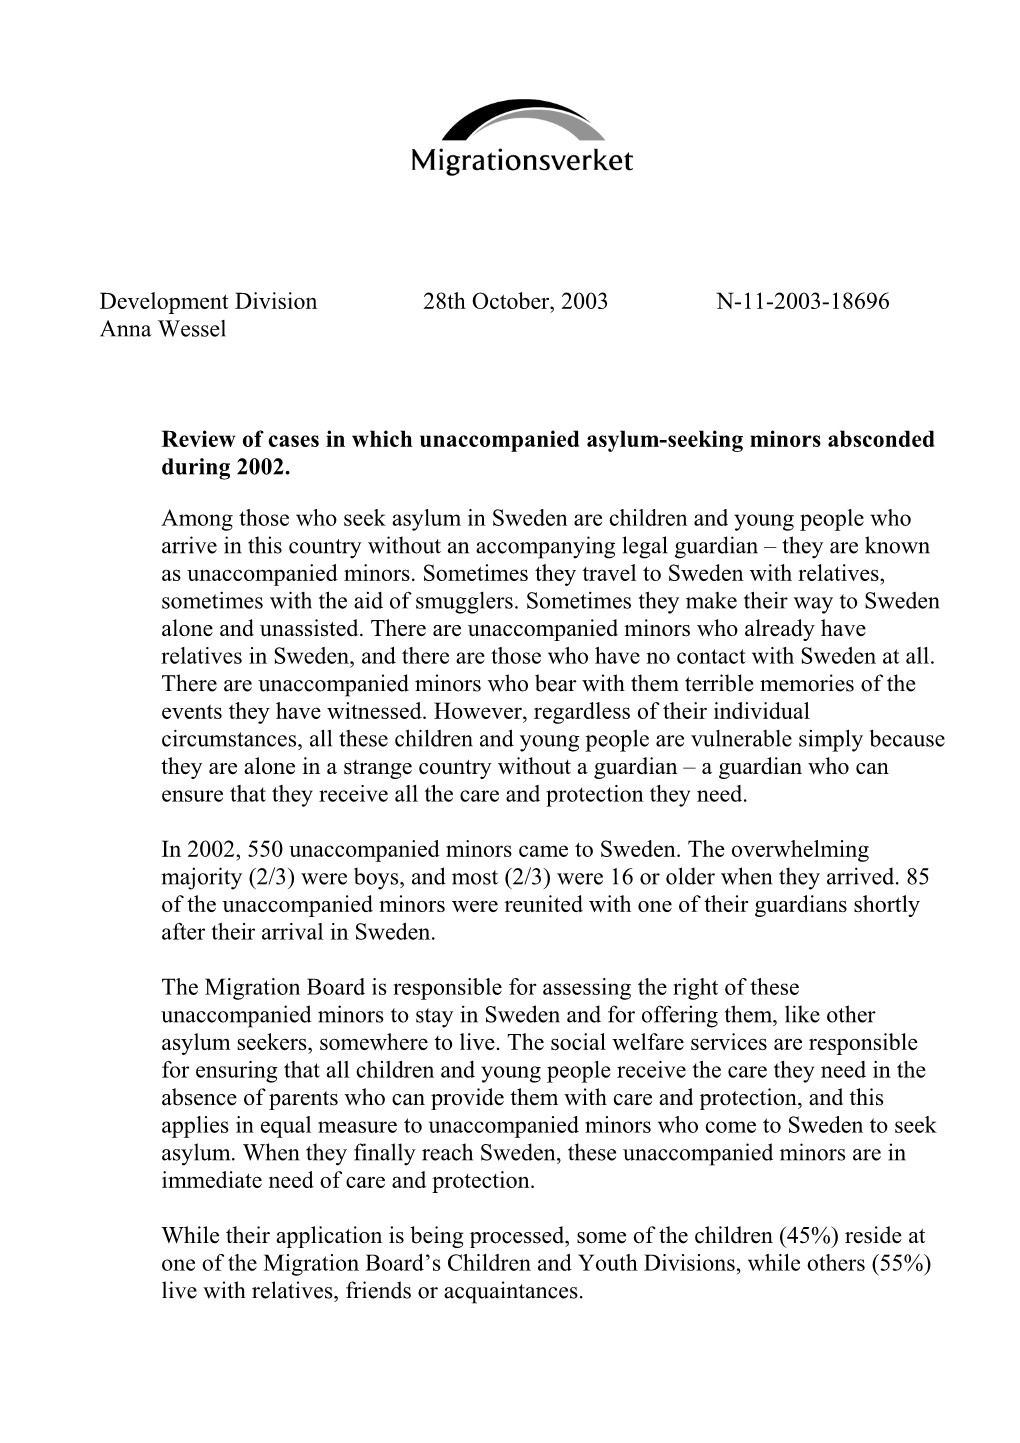 Review of Cases in Which Unaccompanied Asylum-Seeking Minors Absconded During 2002